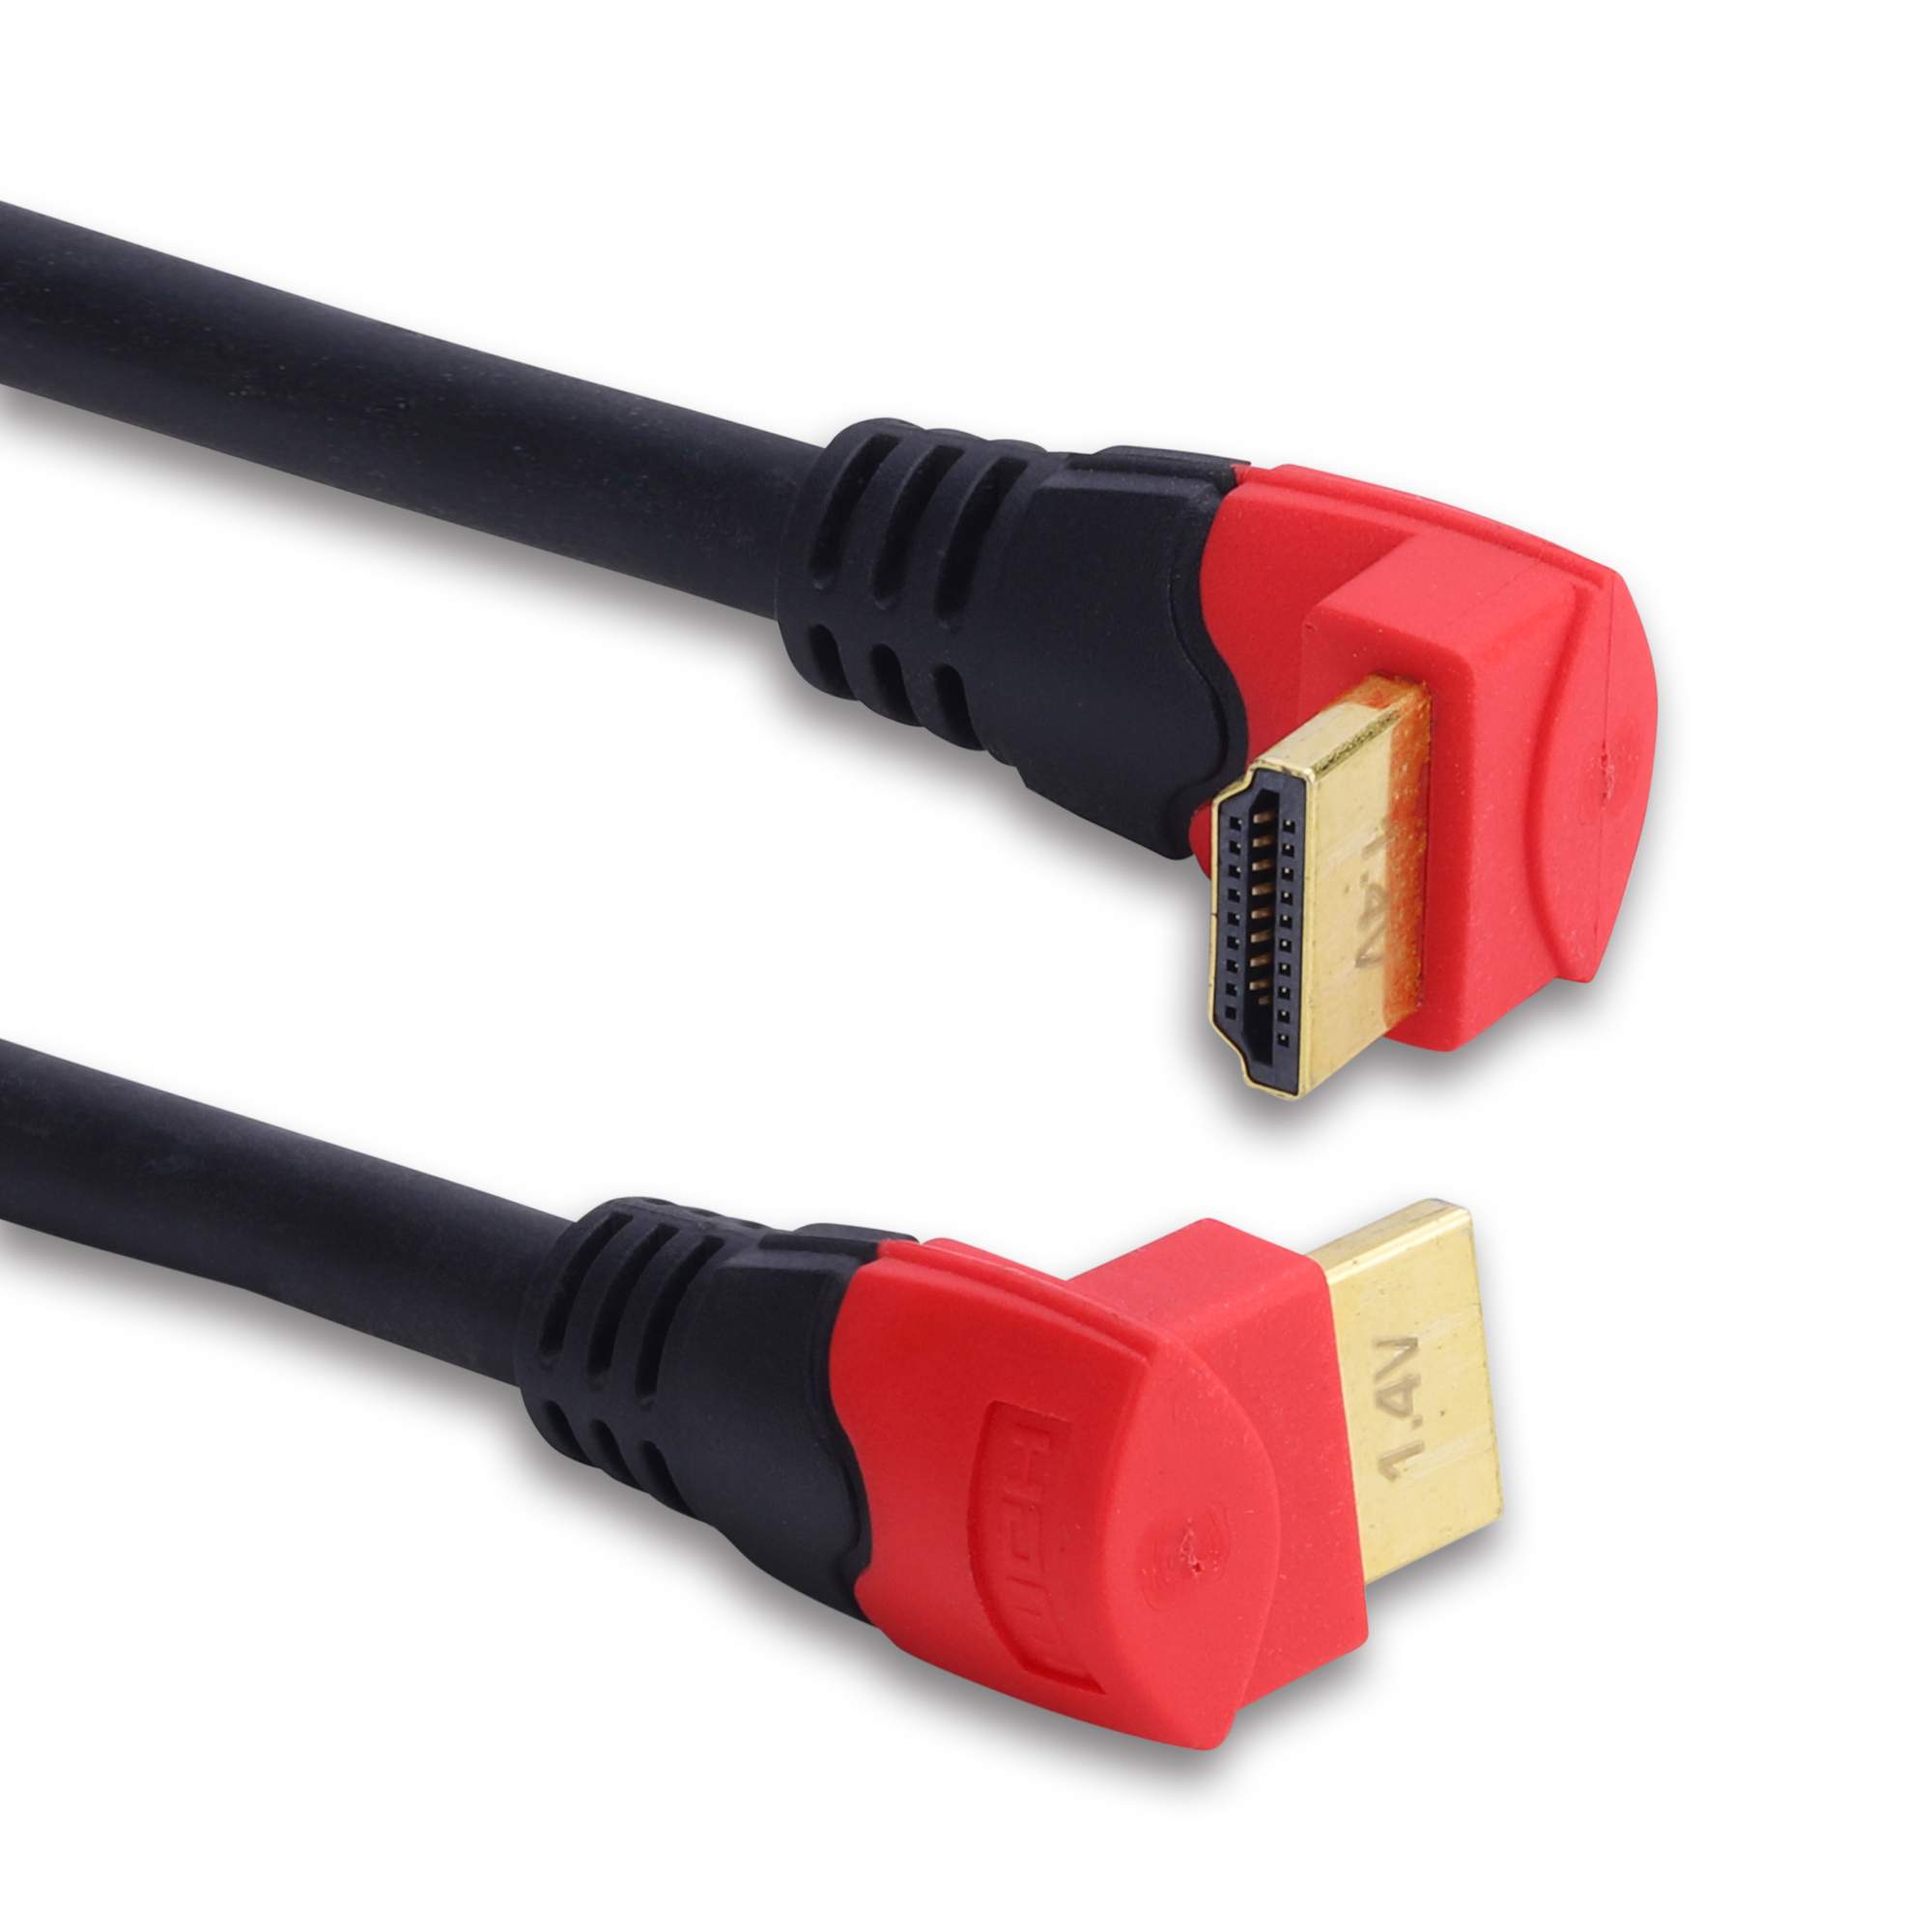 MX Ultra High Speed HDMI 2.1V Male to Male cable supports 8k/60Hz & 4k/120Hz  with Transfer rate of 48Gbps & eARC Support : 3 Meters (3 Mtr)-(MX-4027A) -  MX MDR TECHNOLOGIES LIMITED